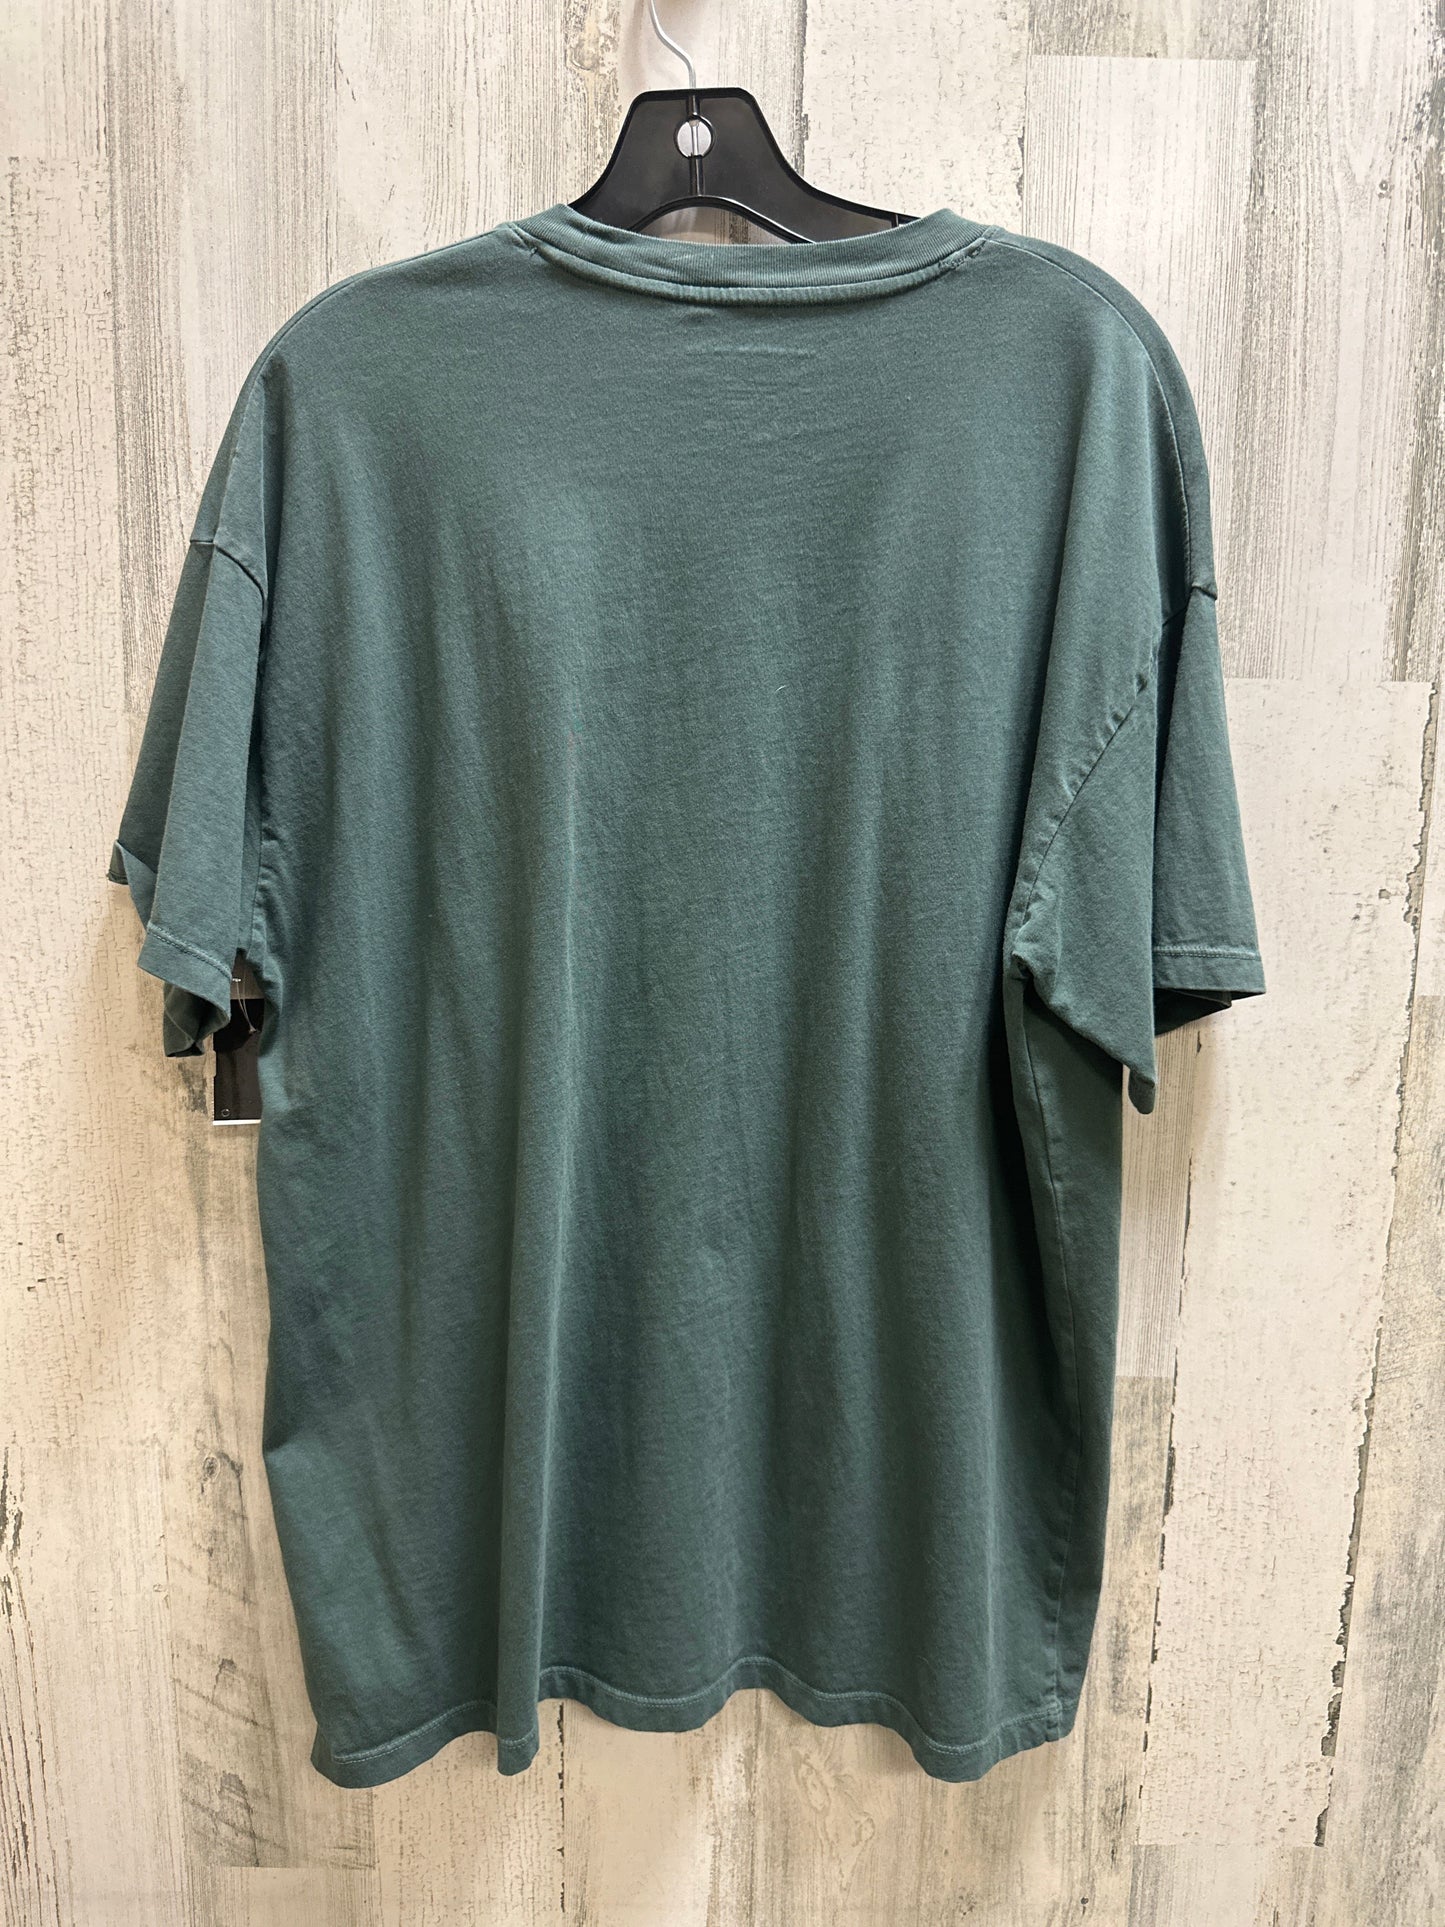 Green Top Short Sleeve American Eagle, Size Xs